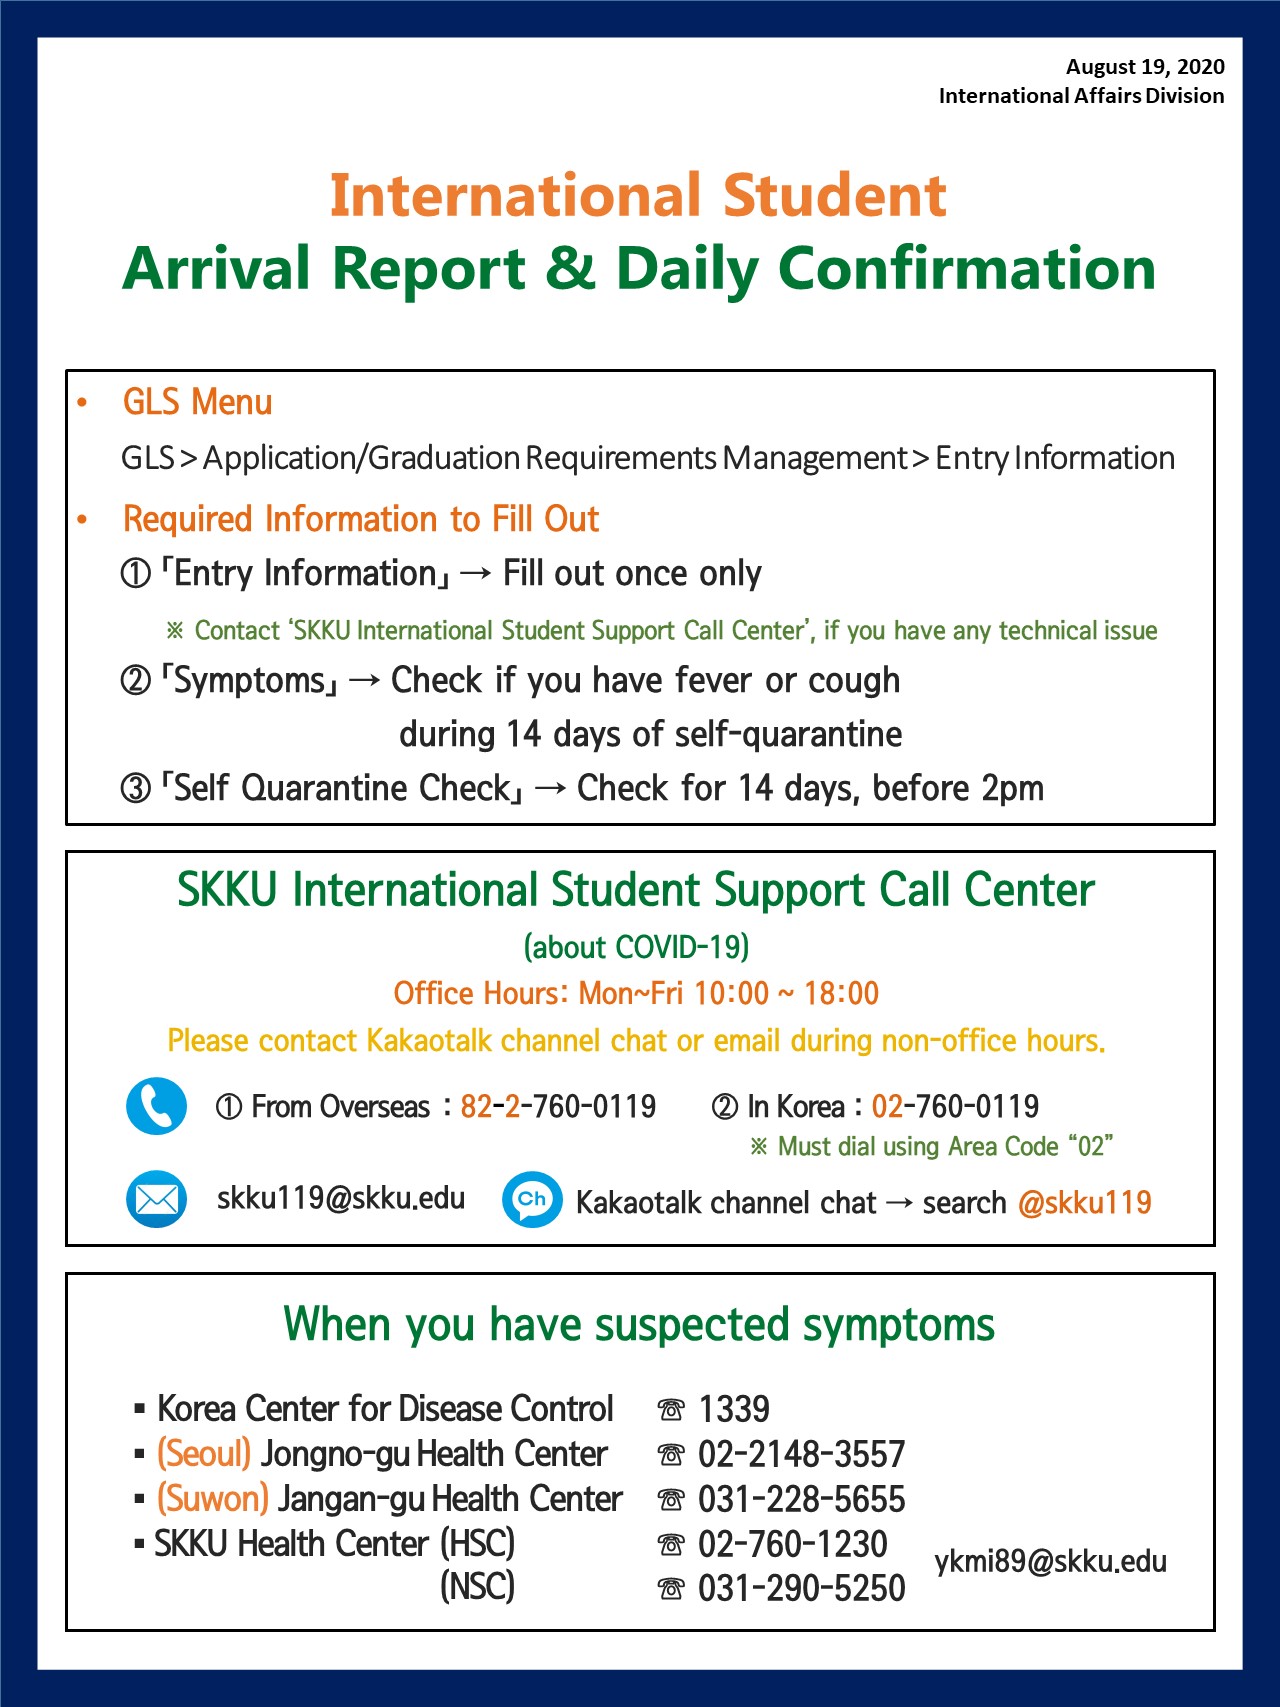 [International Student] Arrival Report & Daily Confirmation